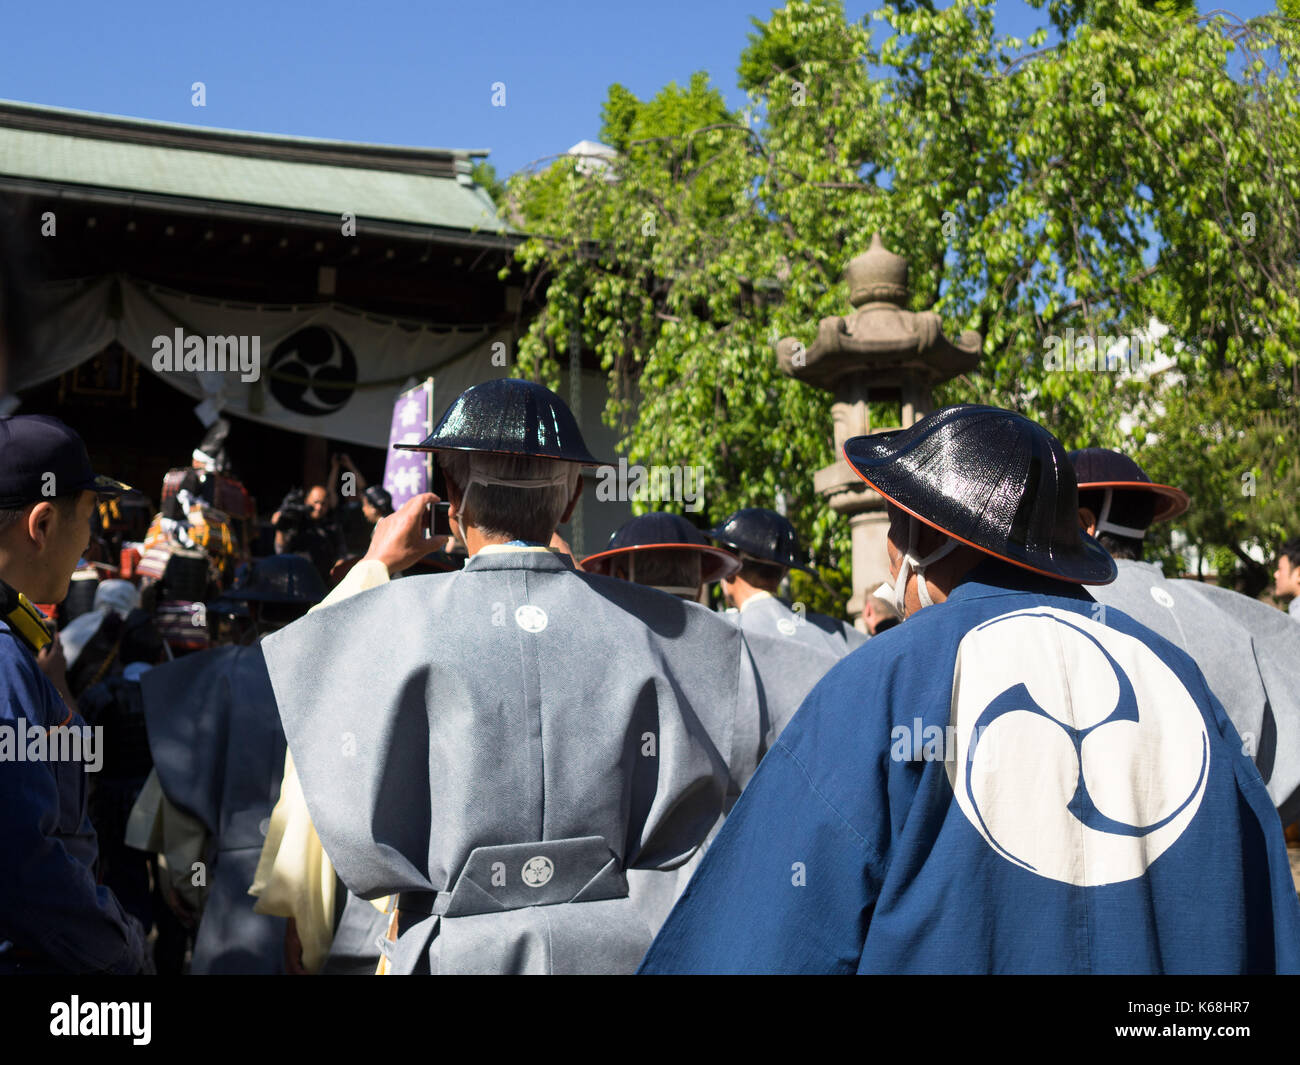 KUDAMATSU, JAPAN - AUGUST 23, 2017: Unidentified people in a parade in the streets of Japan Stock Photo